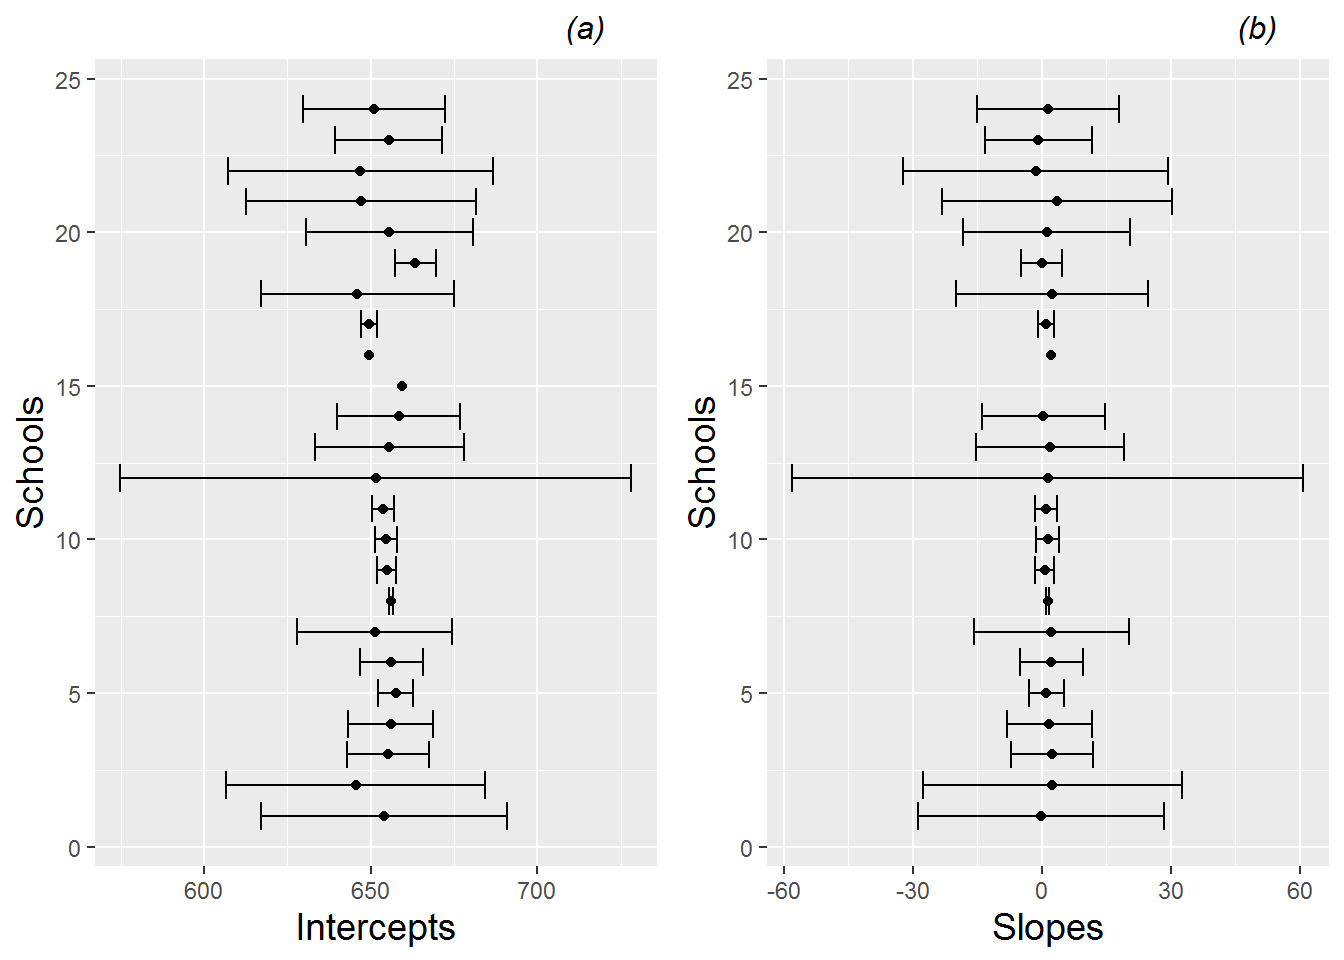 Point estimates and 95% confidence intervals for (a) intercepts and (b) slopes by school, for the first 24 schools in the data set.